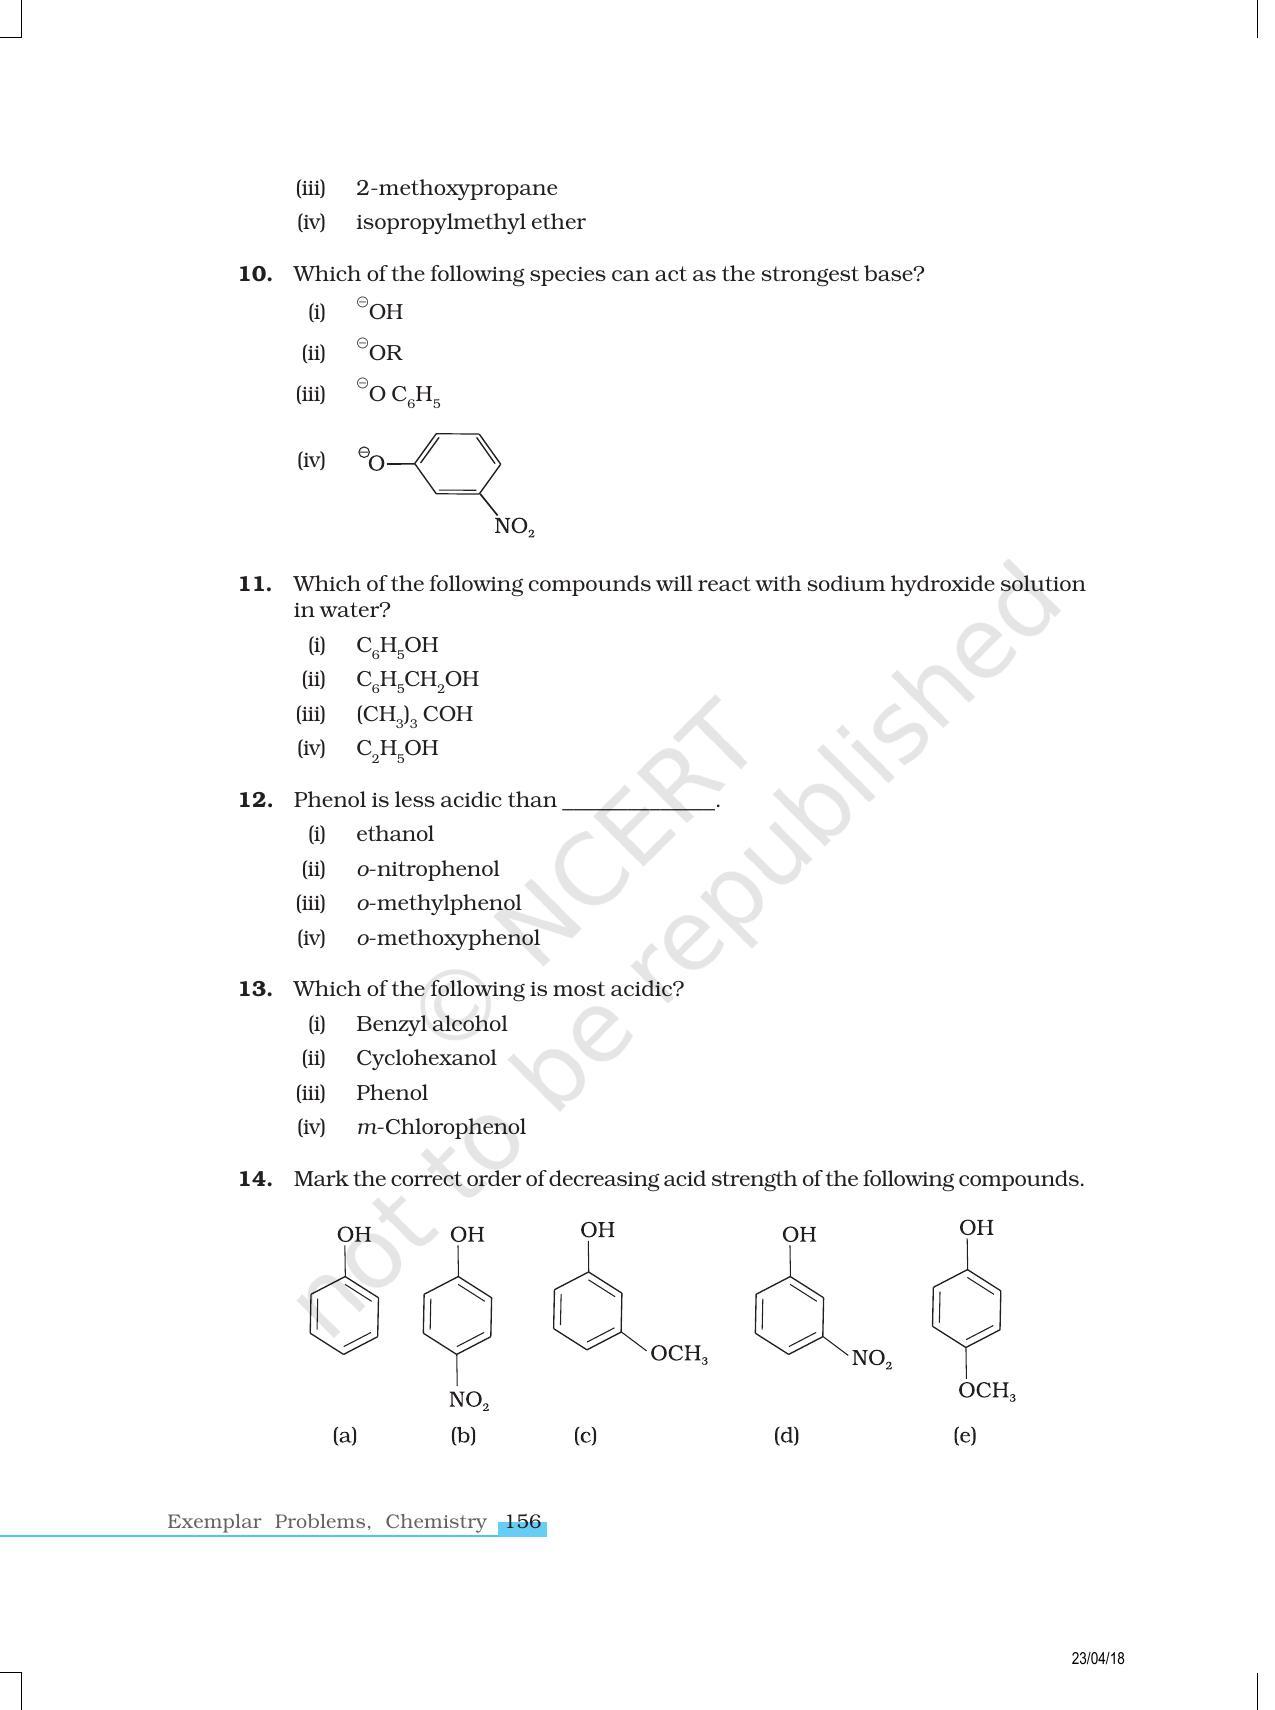 NCERT Exemplar Book for Class 12 Chemistry: Chapter 11 Alcohols, Phenols and Ethers - Page 3